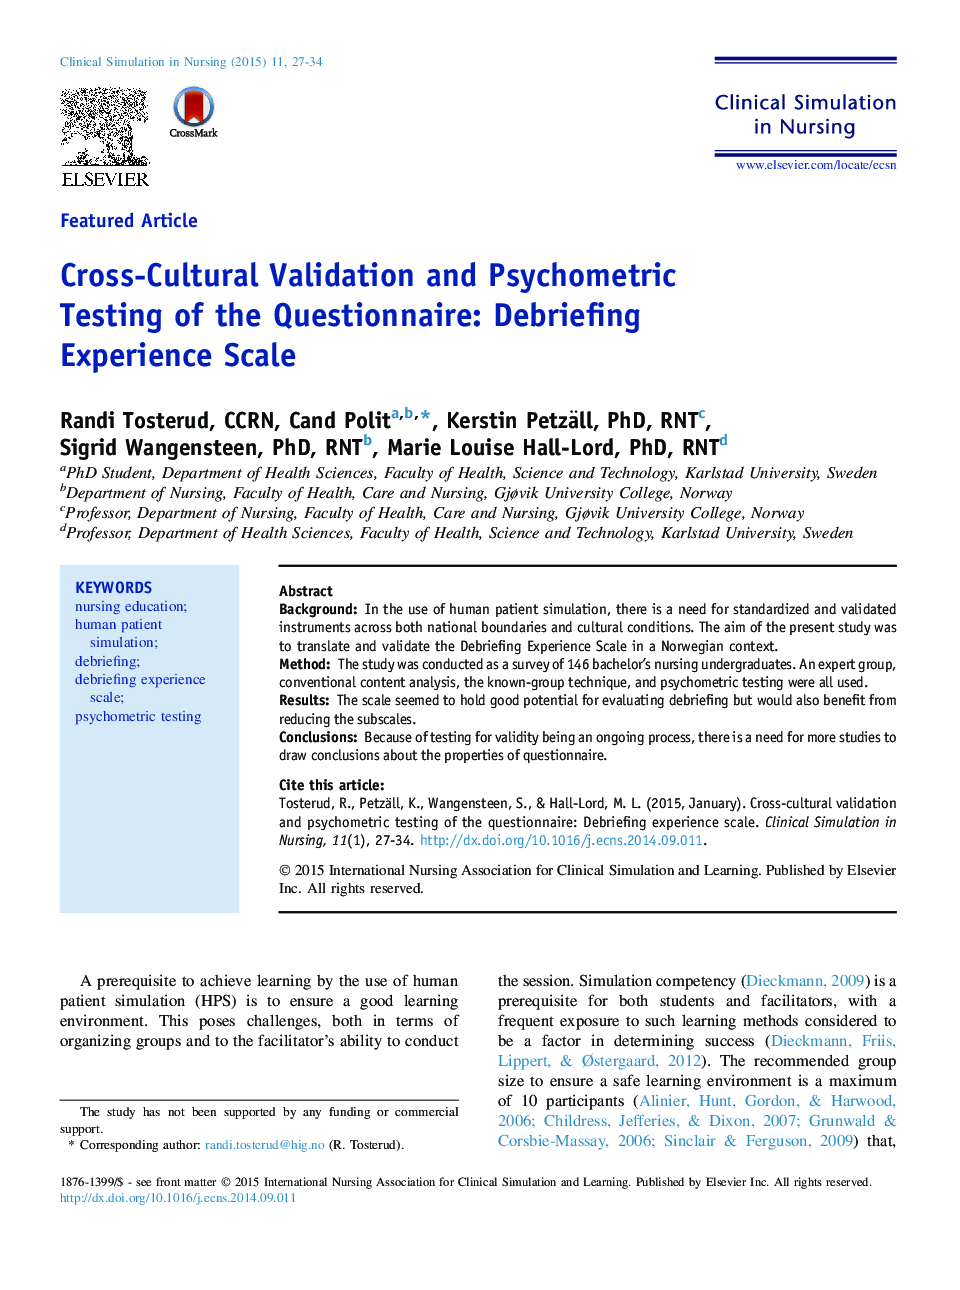 Cross-Cultural Validation and Psychometric Testing of the Questionnaire: Debriefing Experience Scale 